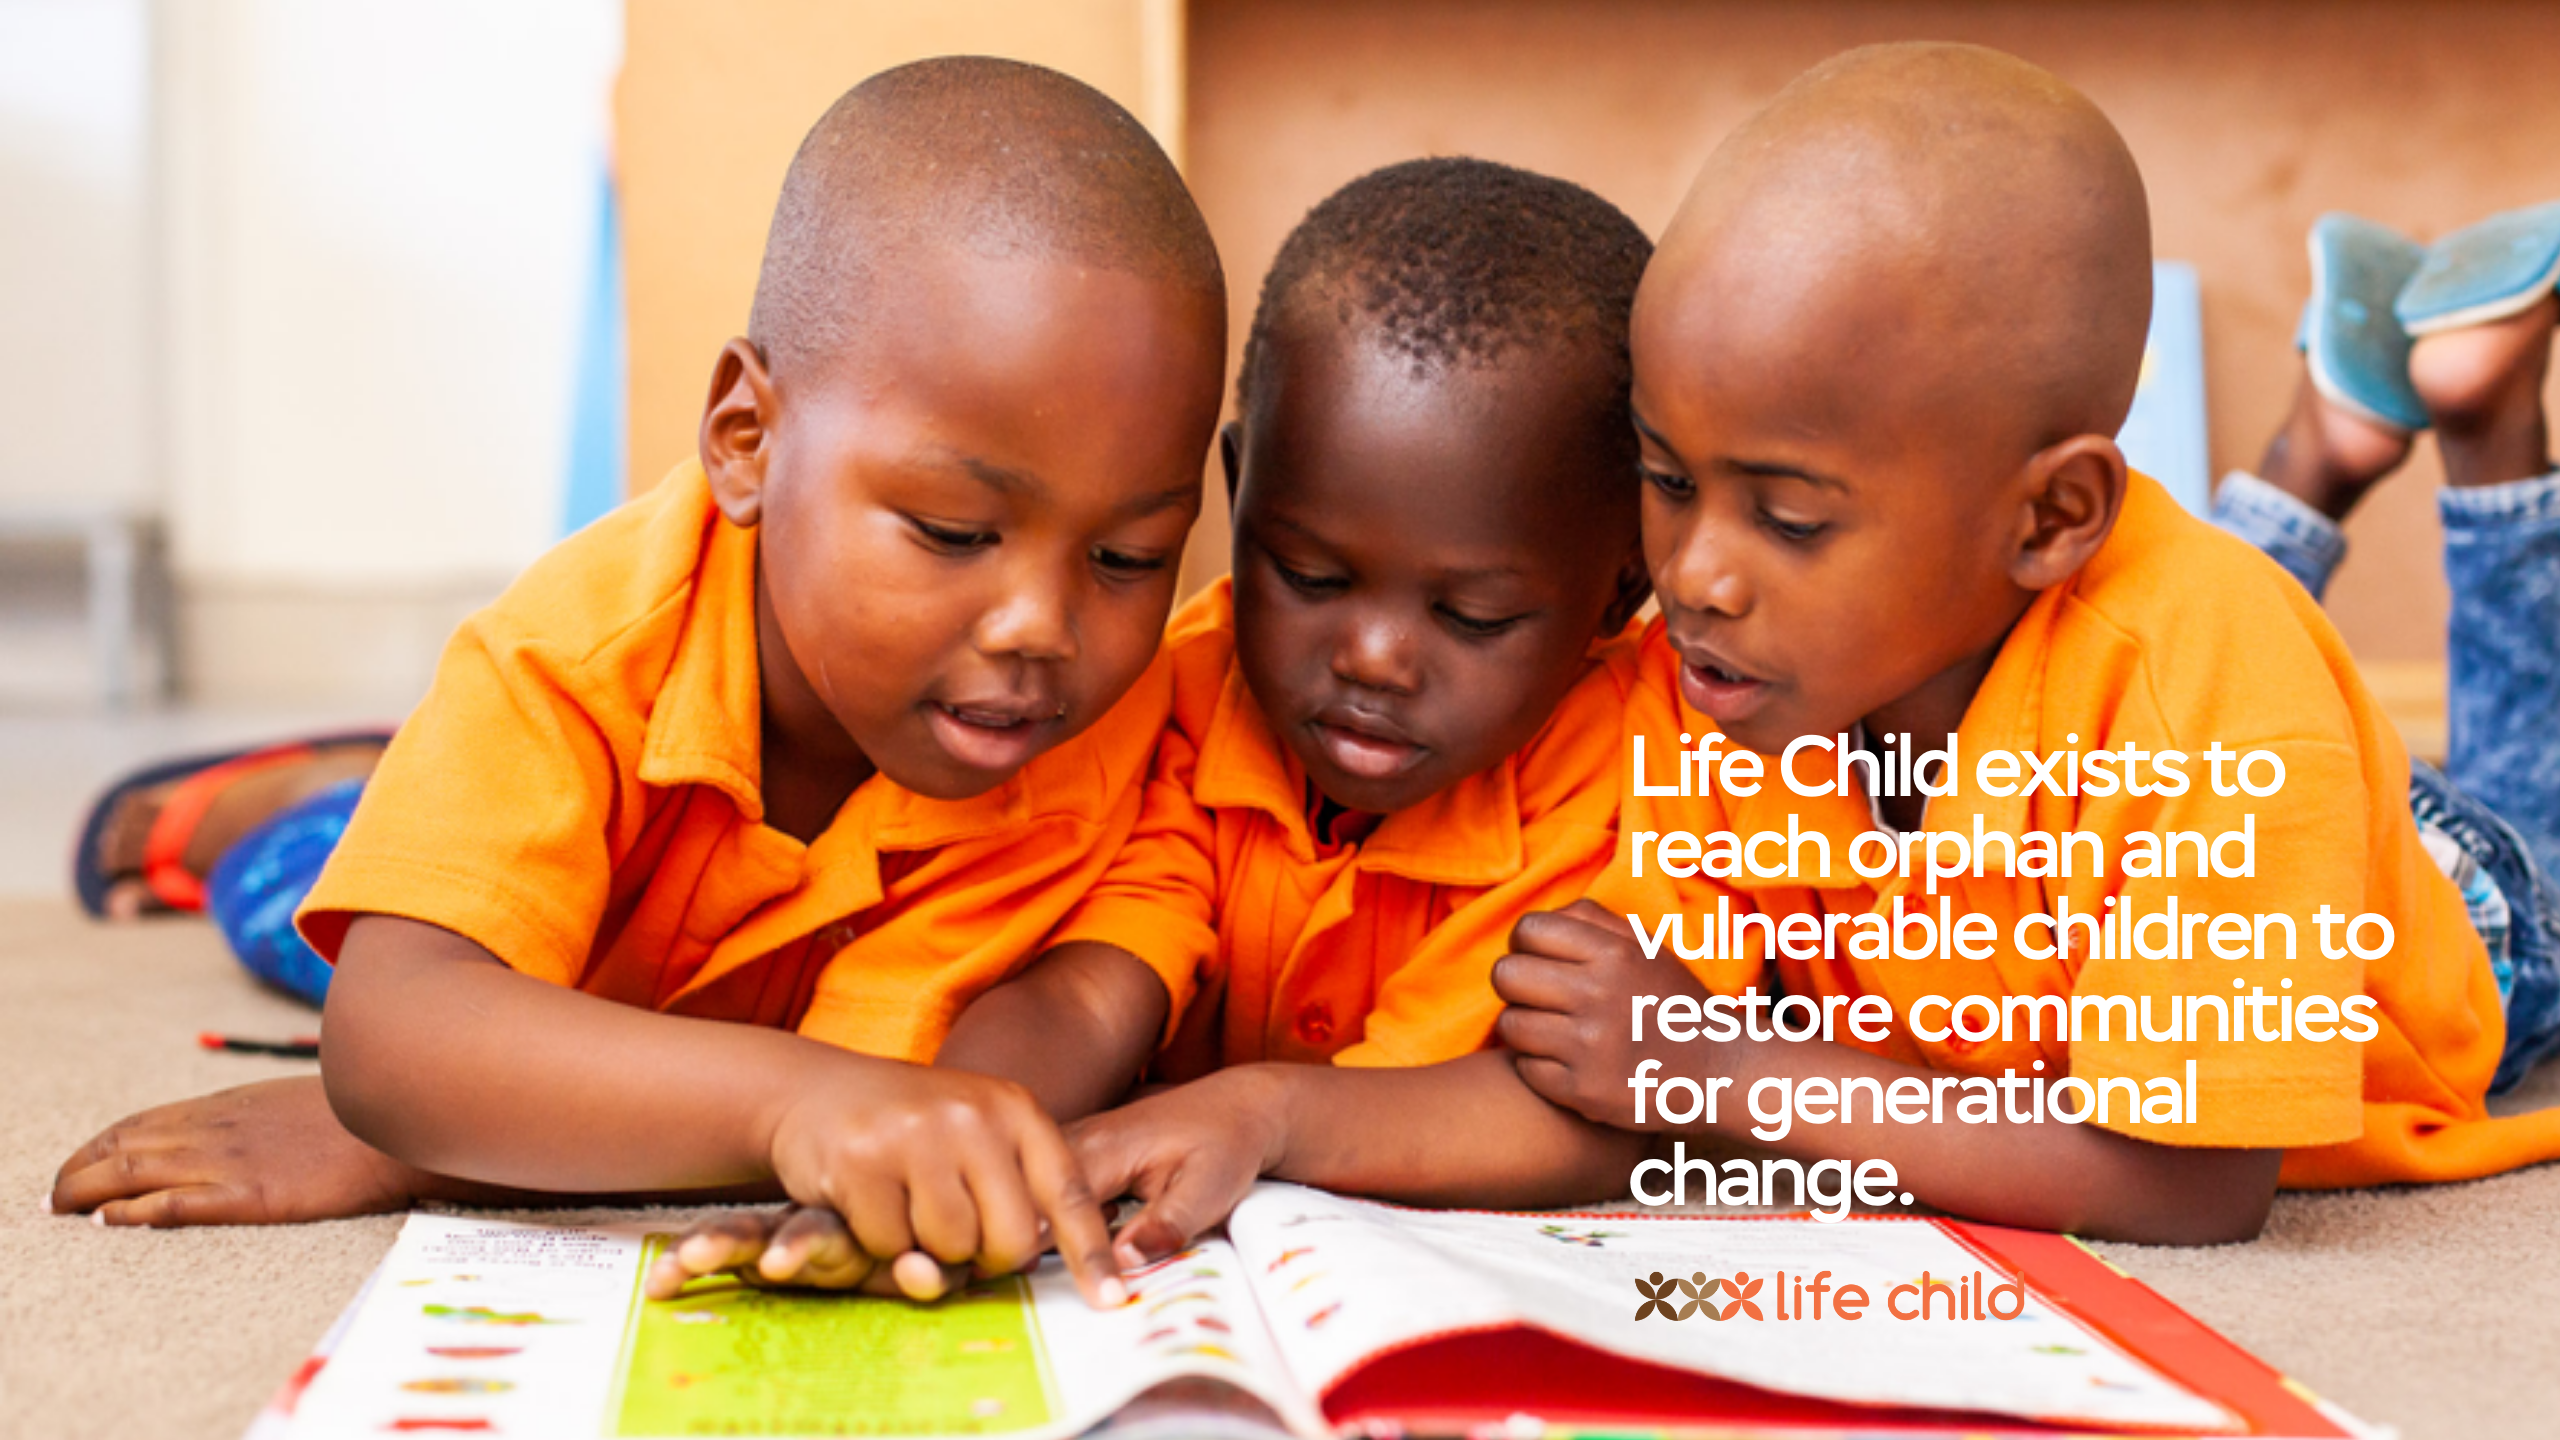 Life Child exists to reach orphan and vulnerable children to restore communities for generational change